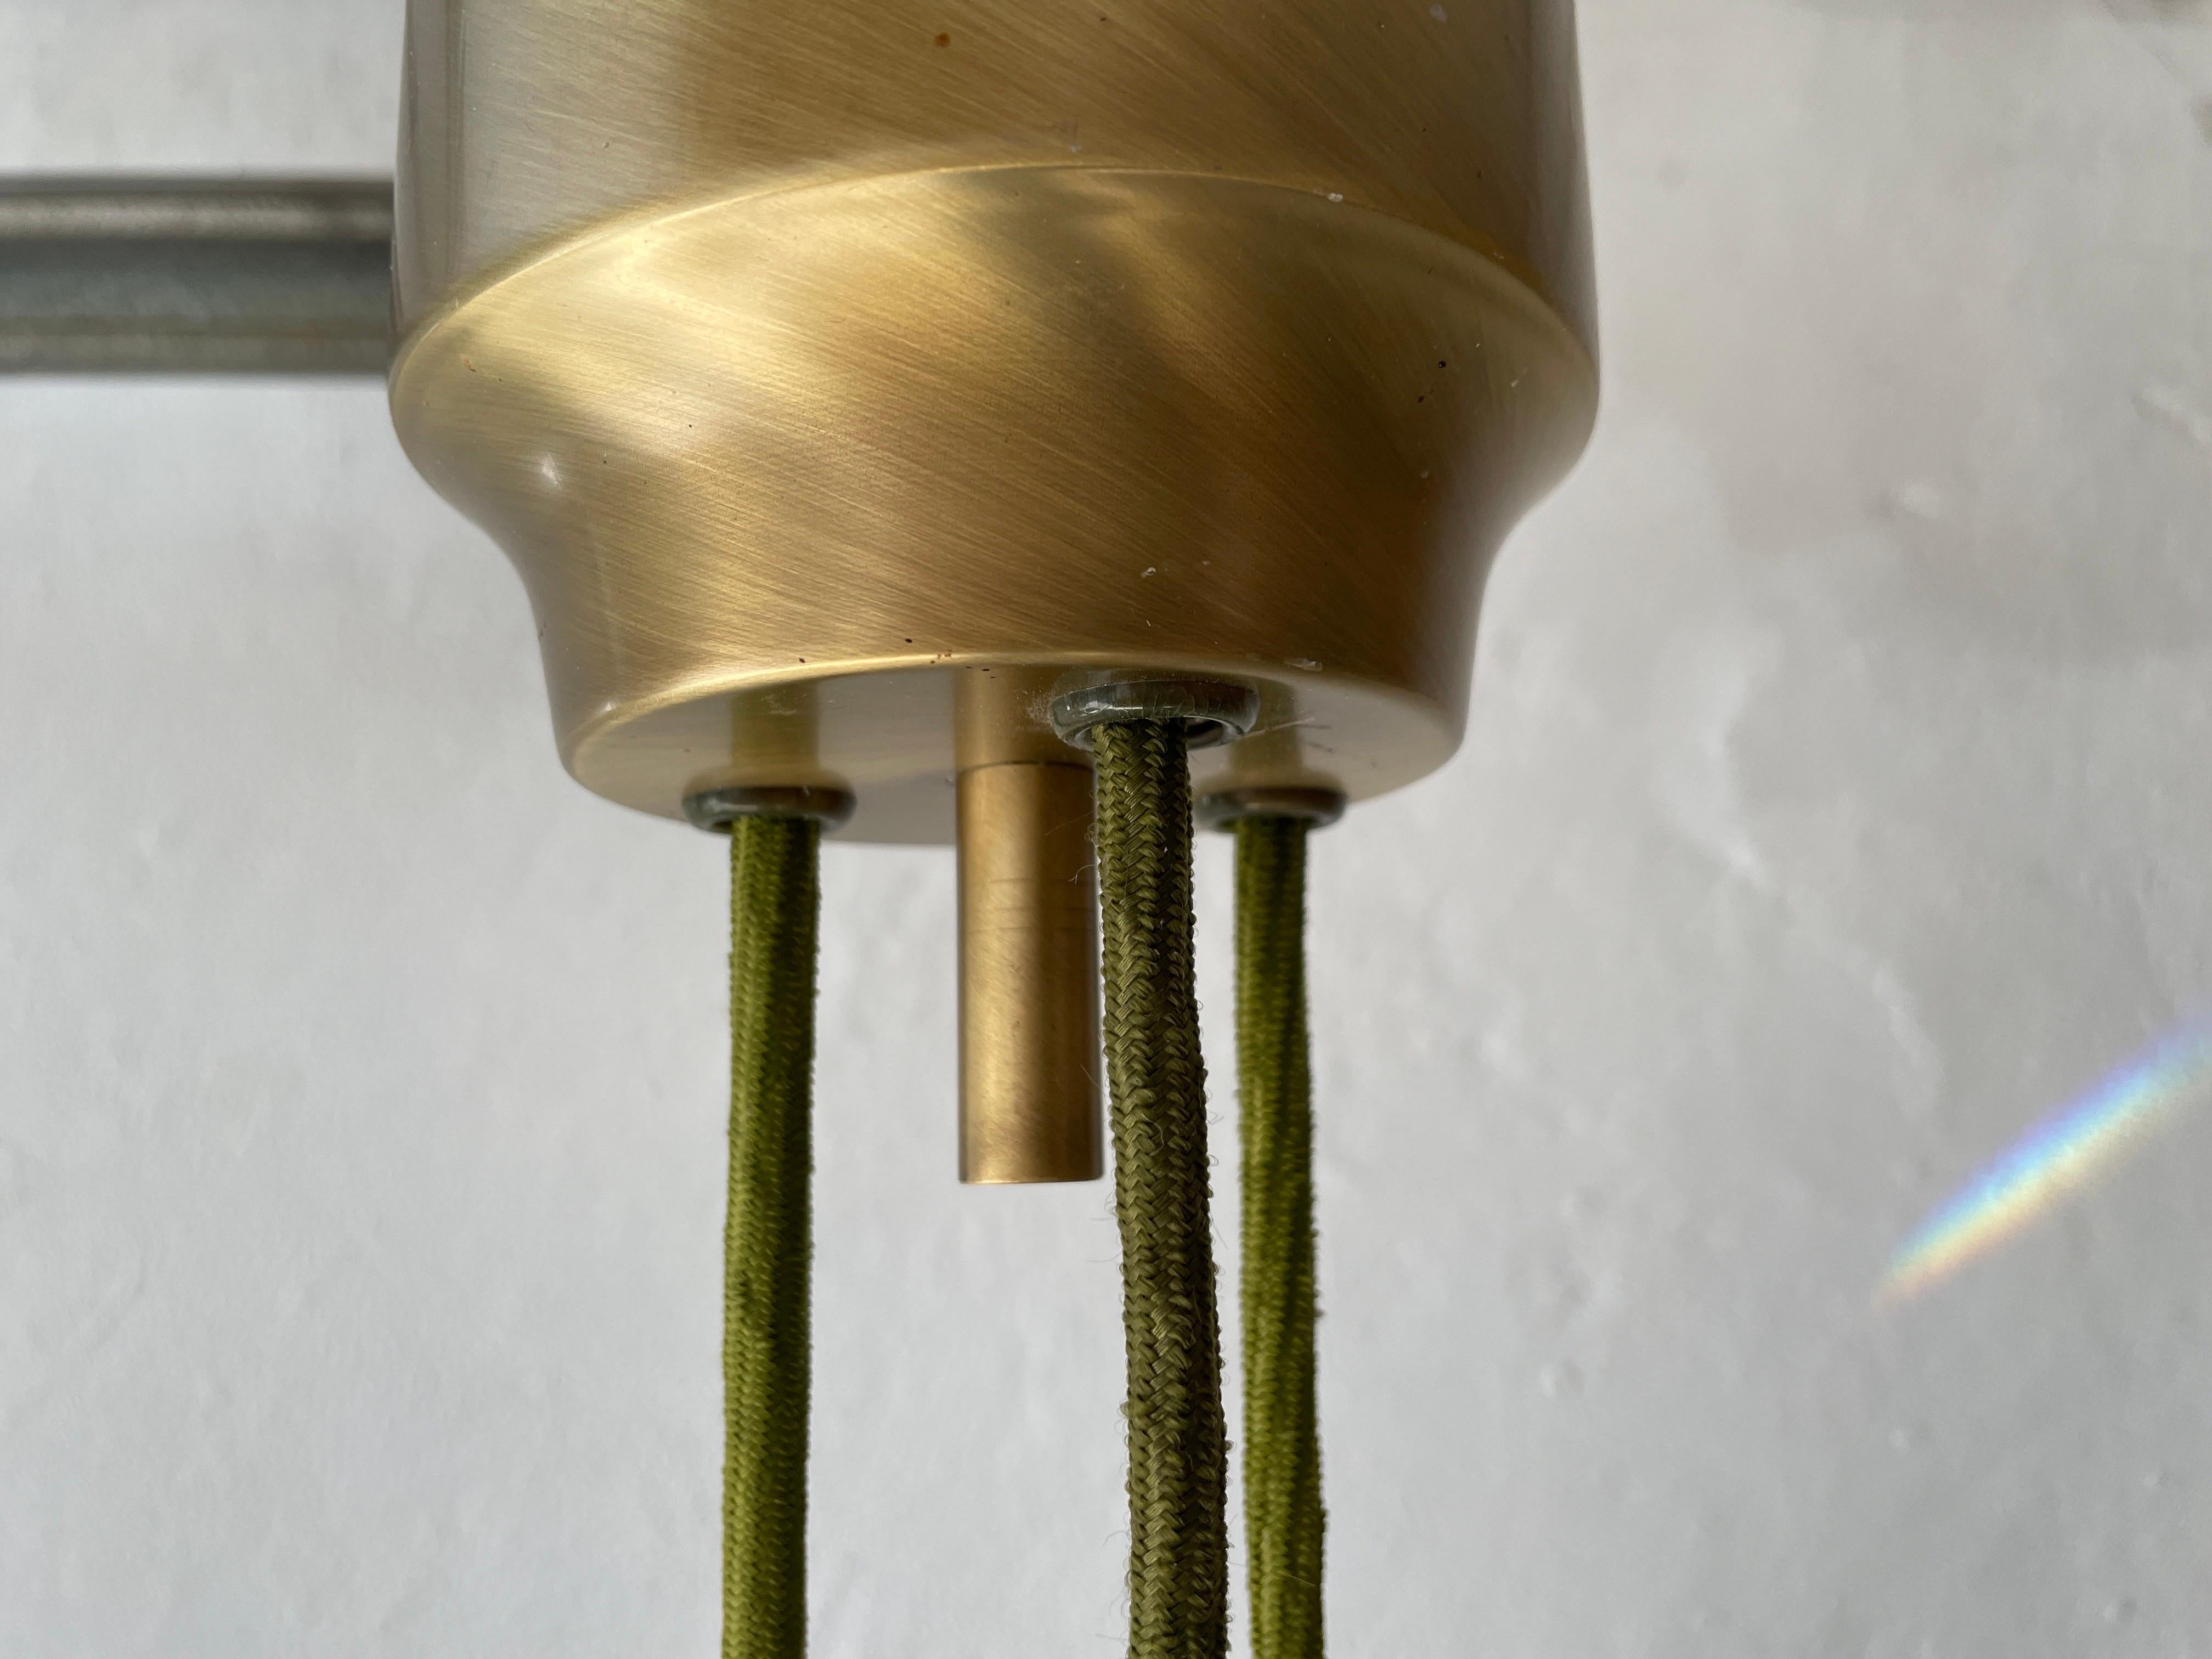 Brass & Fabric Shade Counterweight Pendant Lamp by Wkr, 1970s, Germany 4